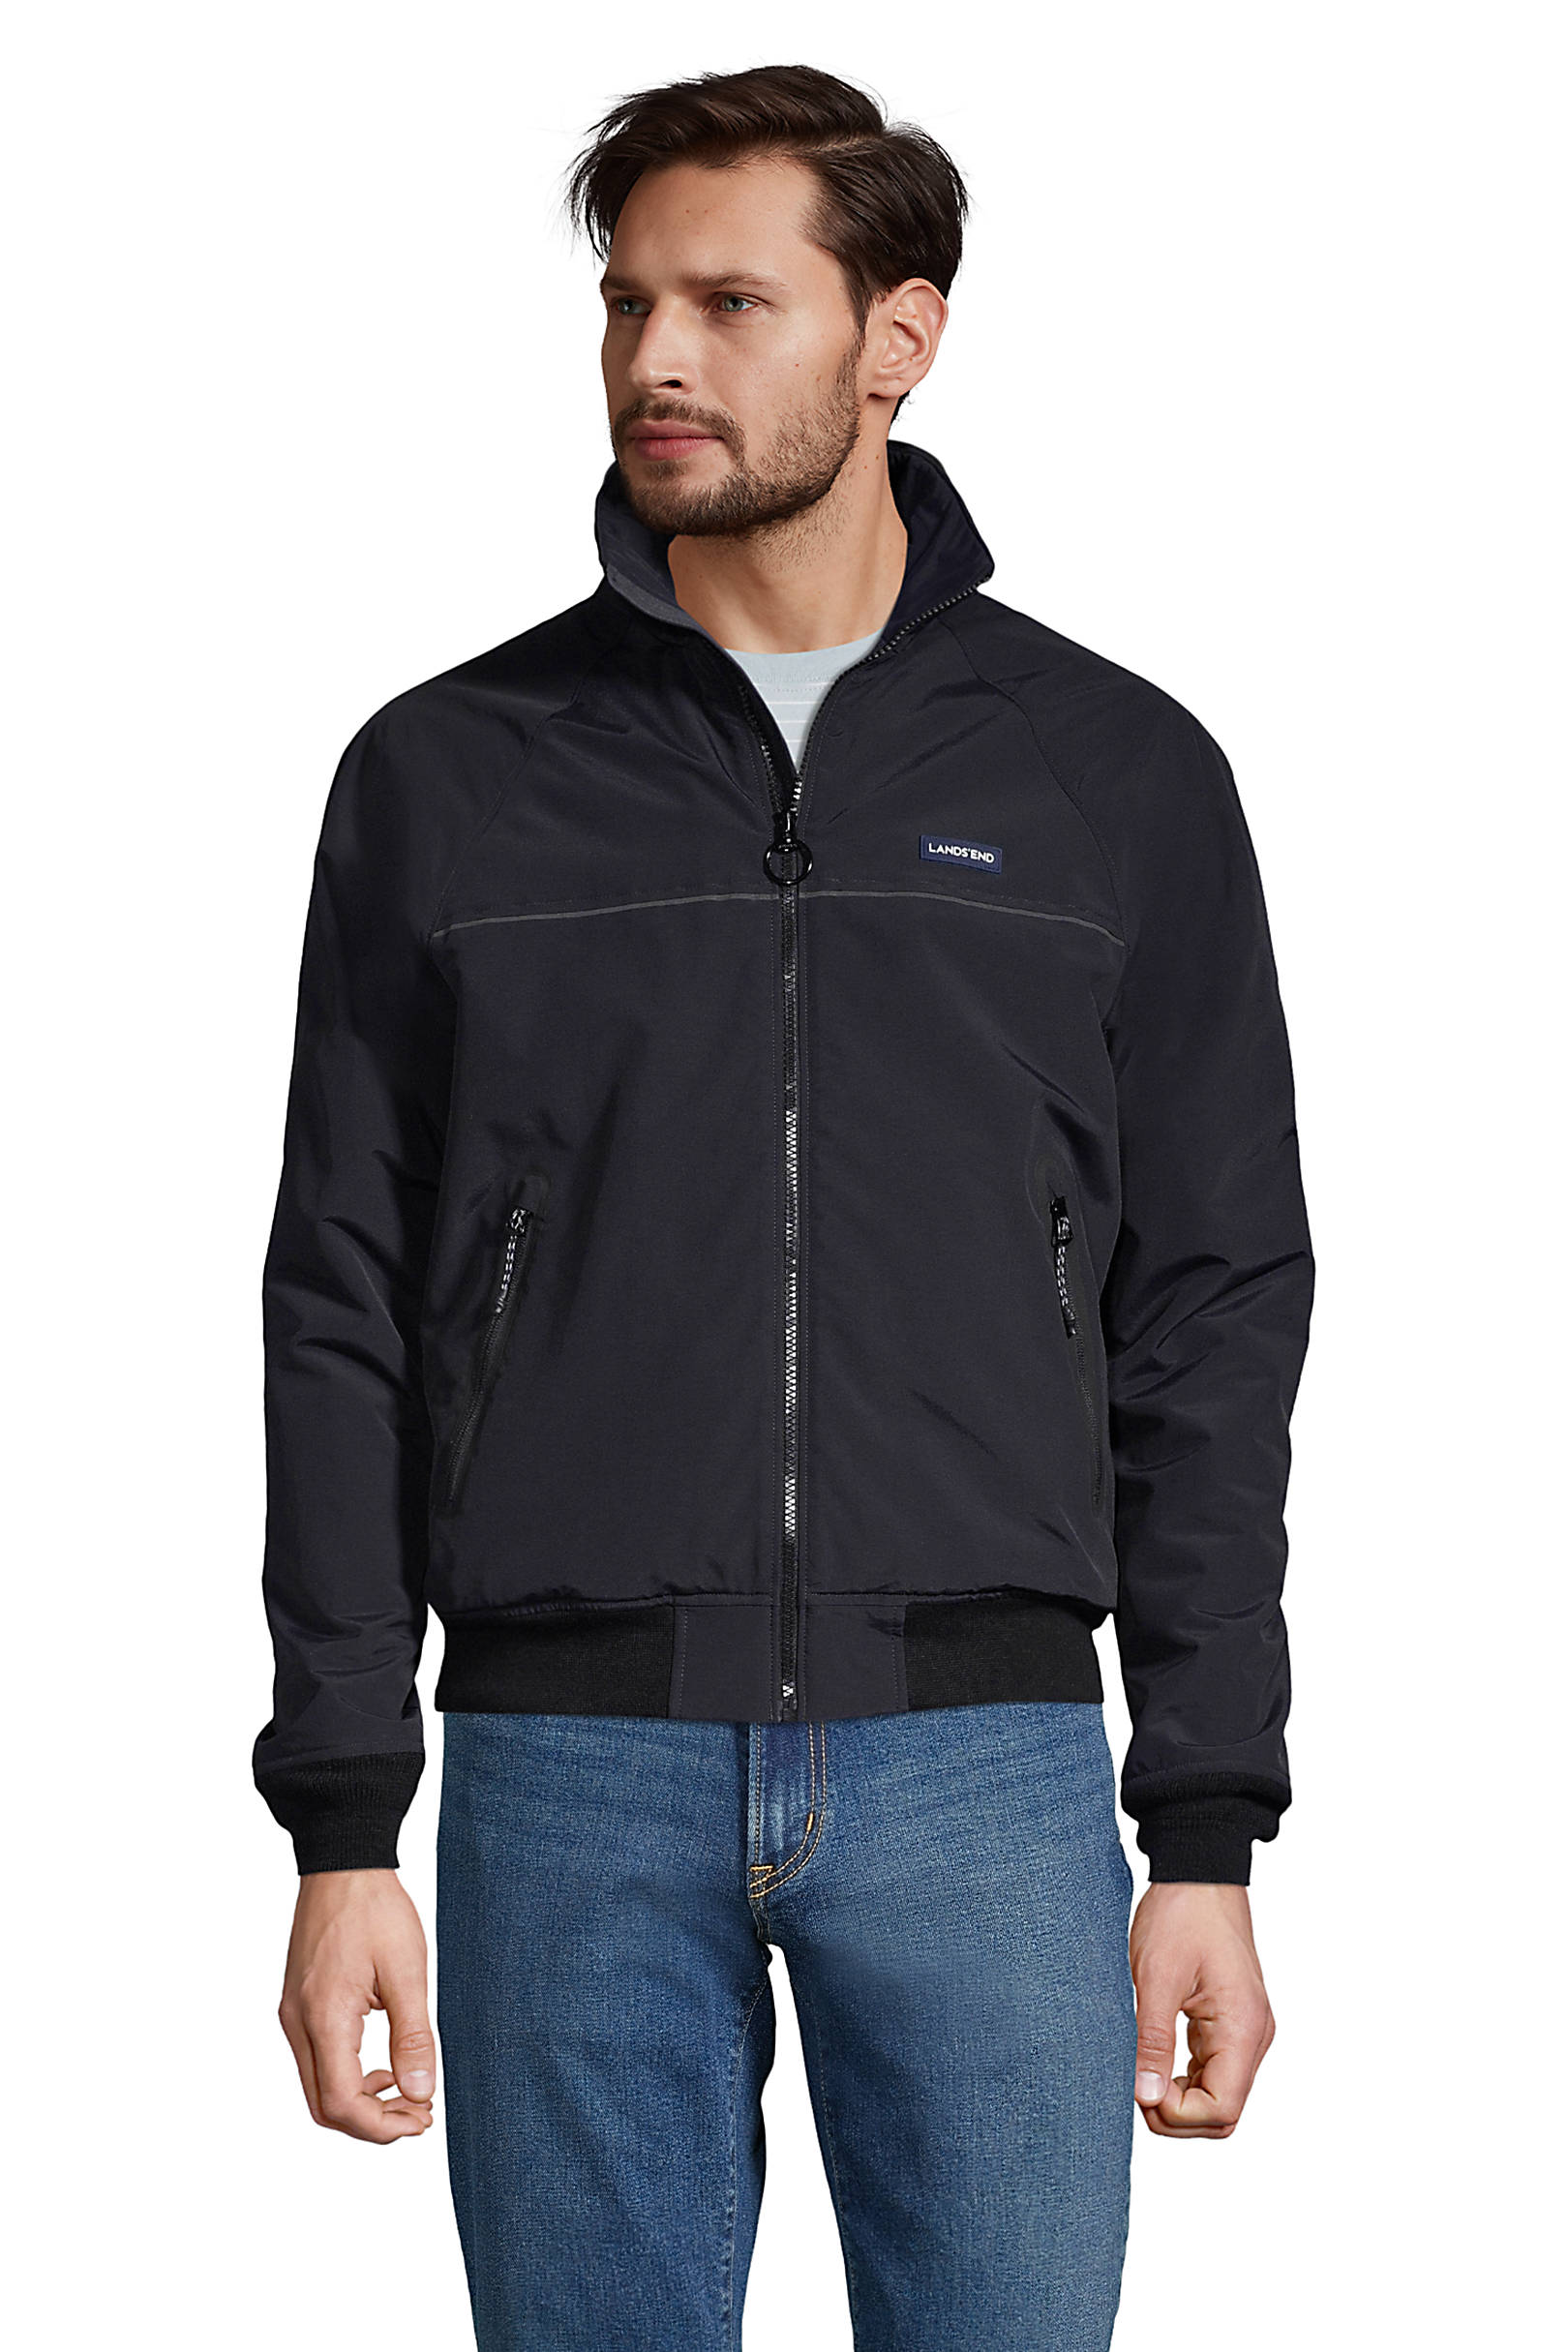 Lands End Great Winter Savings: Up to 70% off Sale Styles